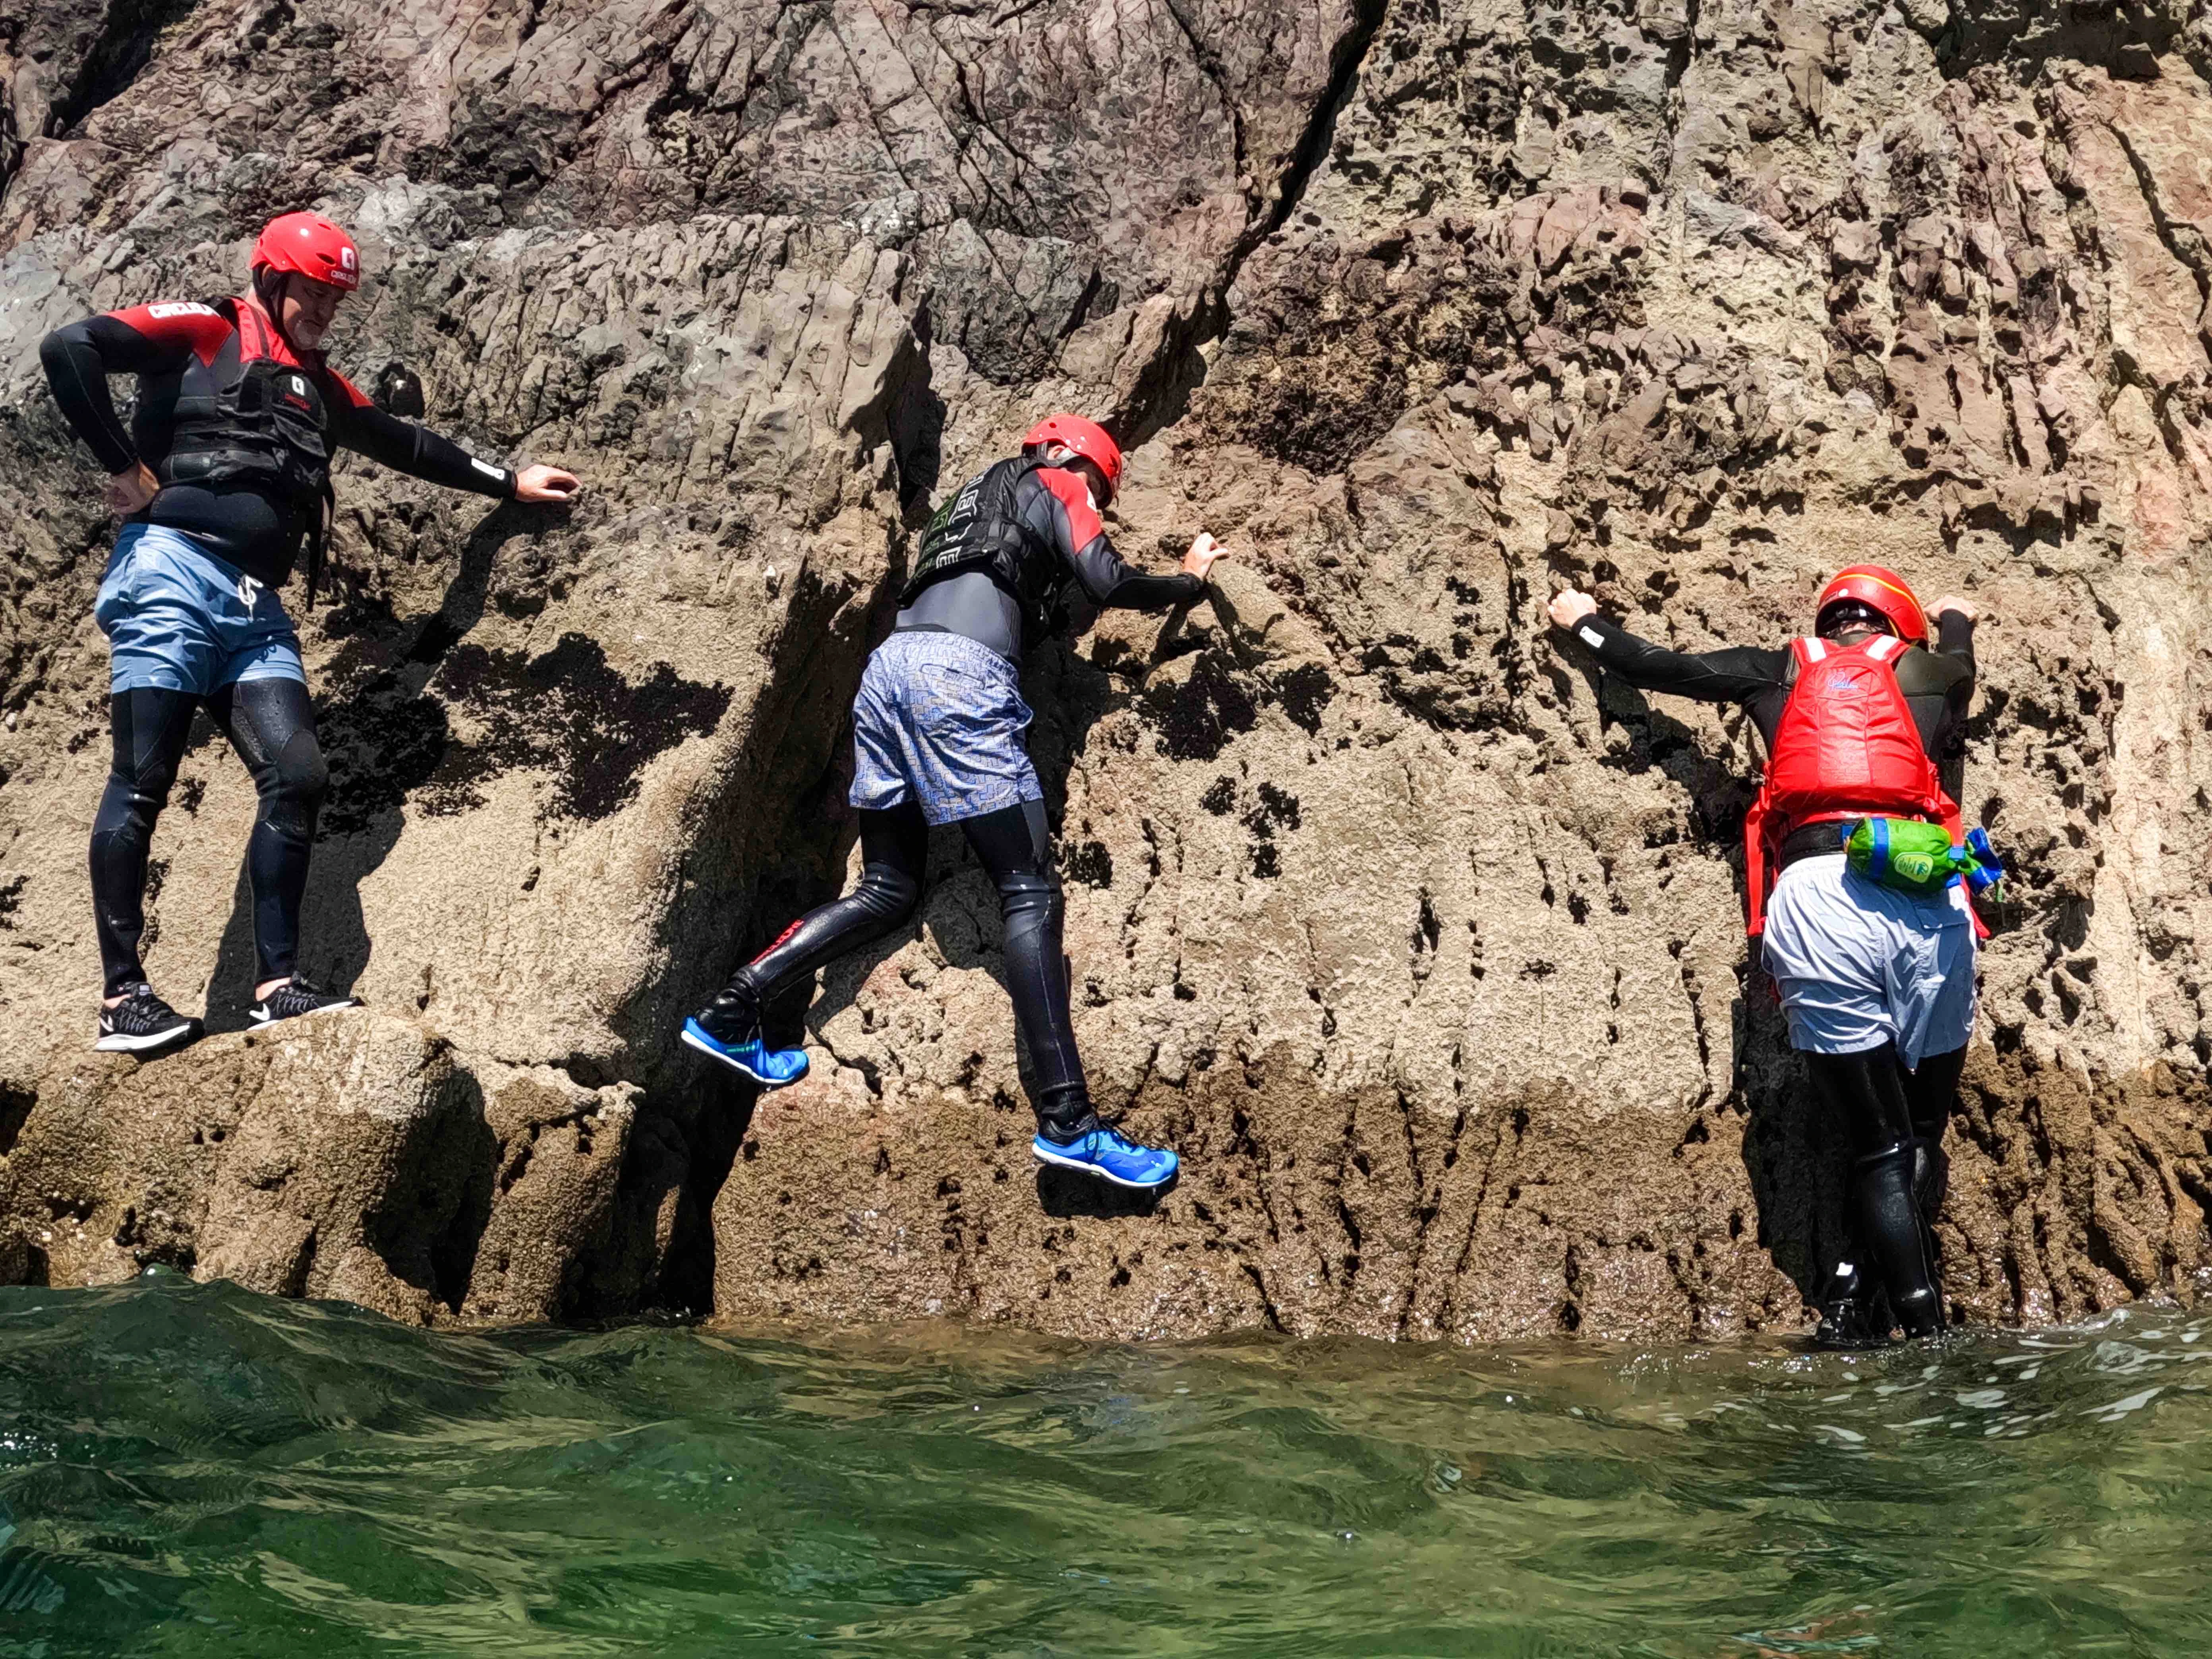 A group of three people in wetsuits and helmets are coasteering in Pembrokeshire.